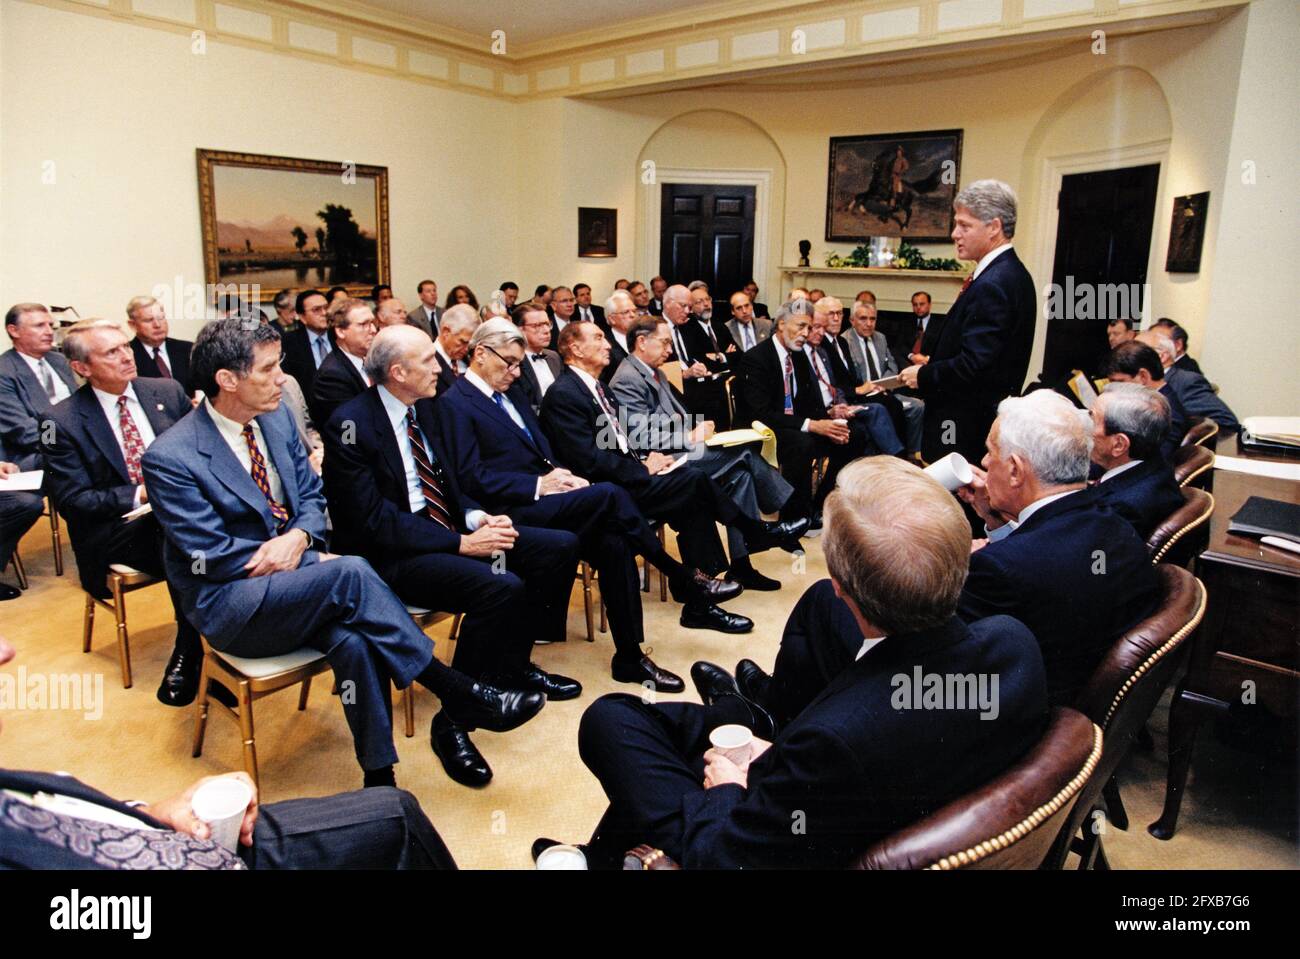 United States President Bill Clinton consults with the bipartisan Congressional leadership on the situation in Somalia in the Roosevelt Room of the White House in Washington, DC on October 7, 1993.  Members visible in the photo include, but are not limited to, US Senator Daniel Inouye (Democrat of Hawaii), US Senator Alan Simpson (Republican of Wyoming), US Senator Mitch McConnell (Republican of Kentucky), US Senator John Warner (Republican of Virginia), US Senator Paul Simon (Democrat of Illinois), US Senator J. Strom Thurmond (Republican of South Carolina), US Senator Sam Nunn (Democrat of G Stock Photo